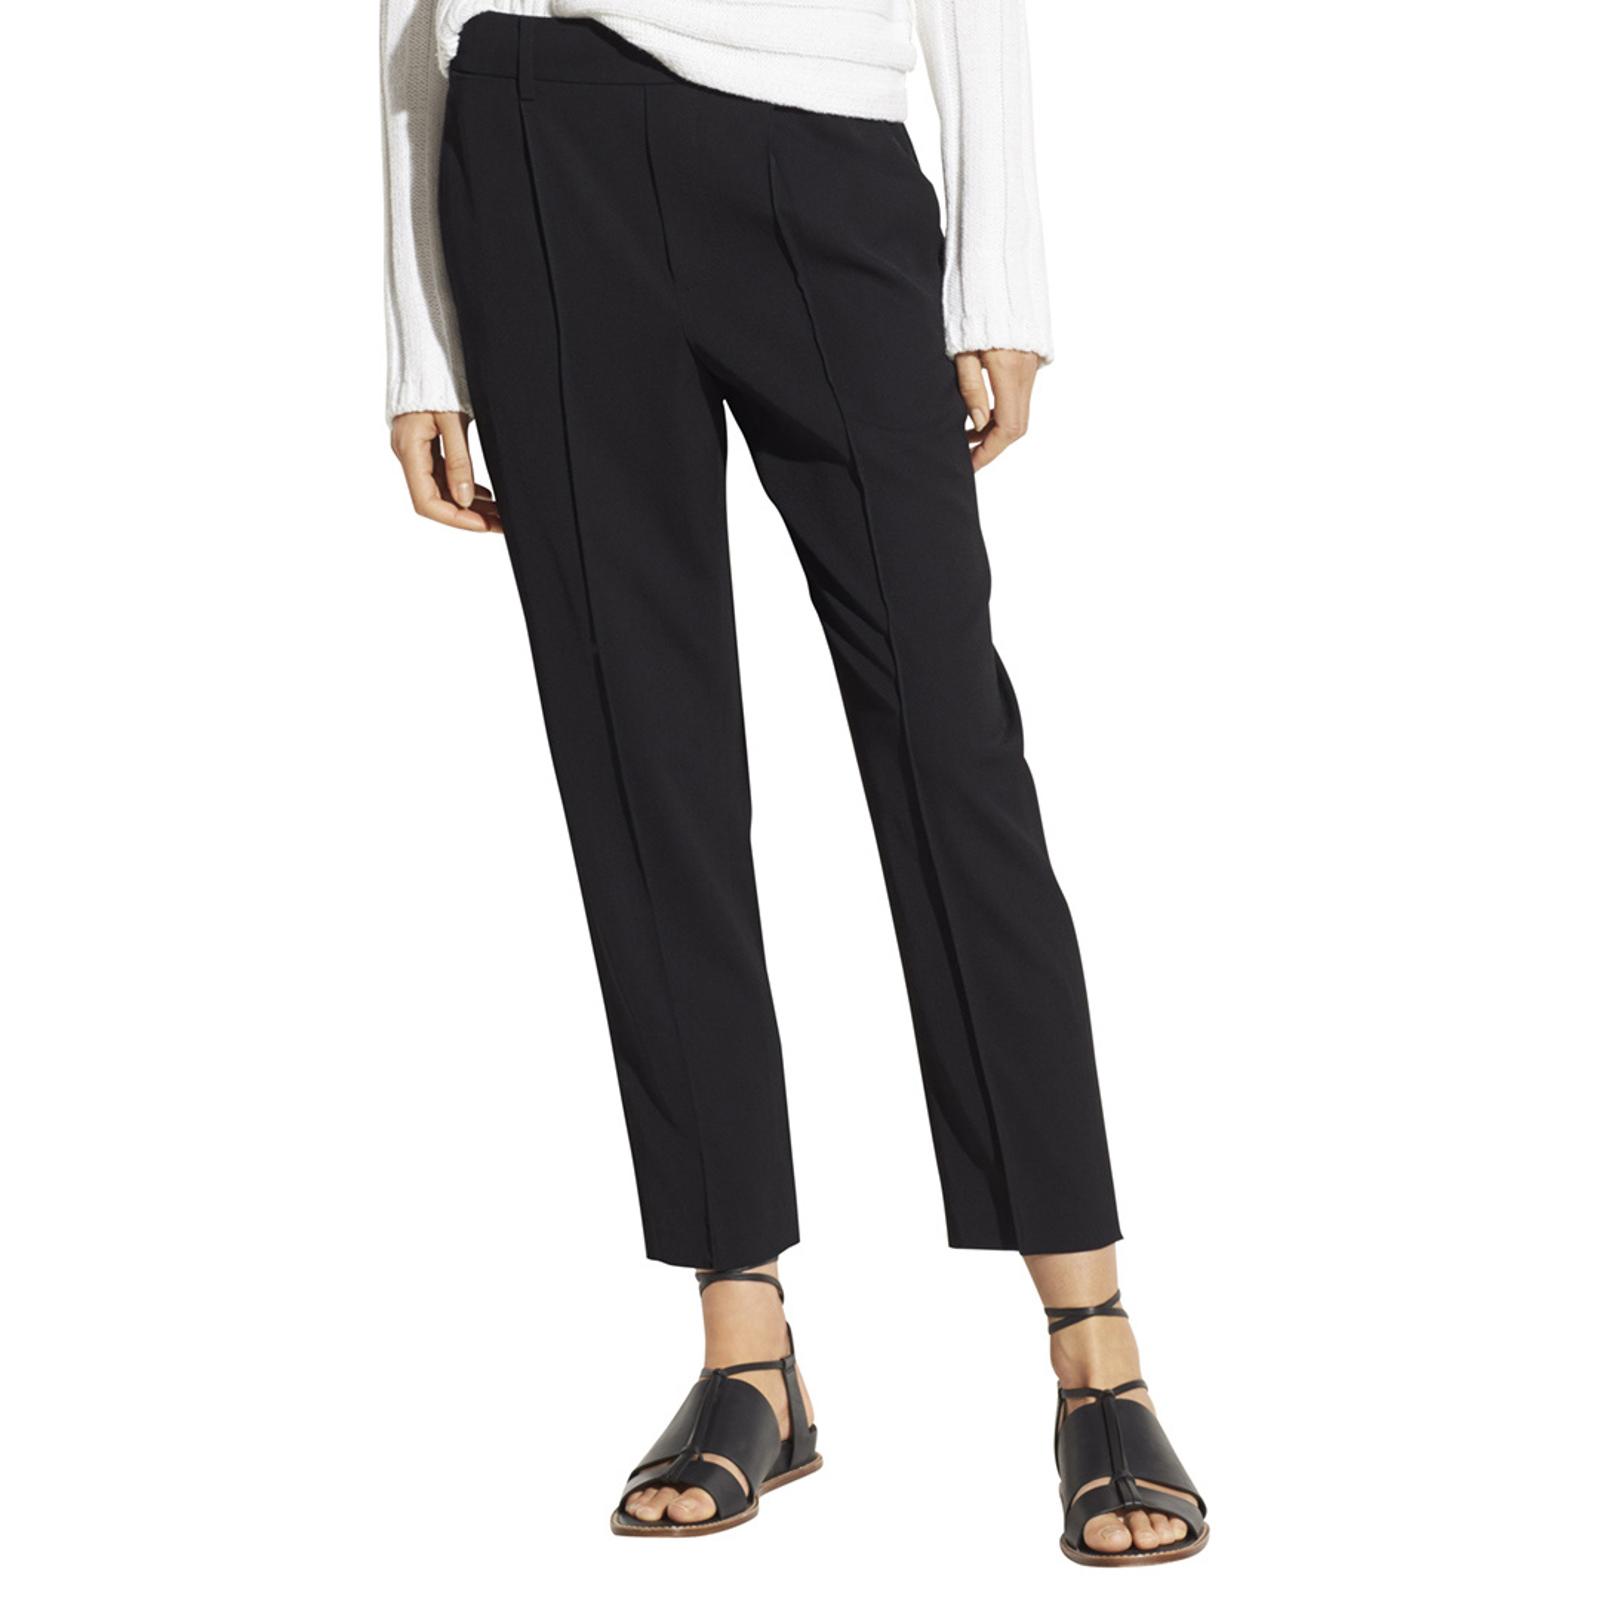 Black Tapered Pull On Trousers - BrandAlley